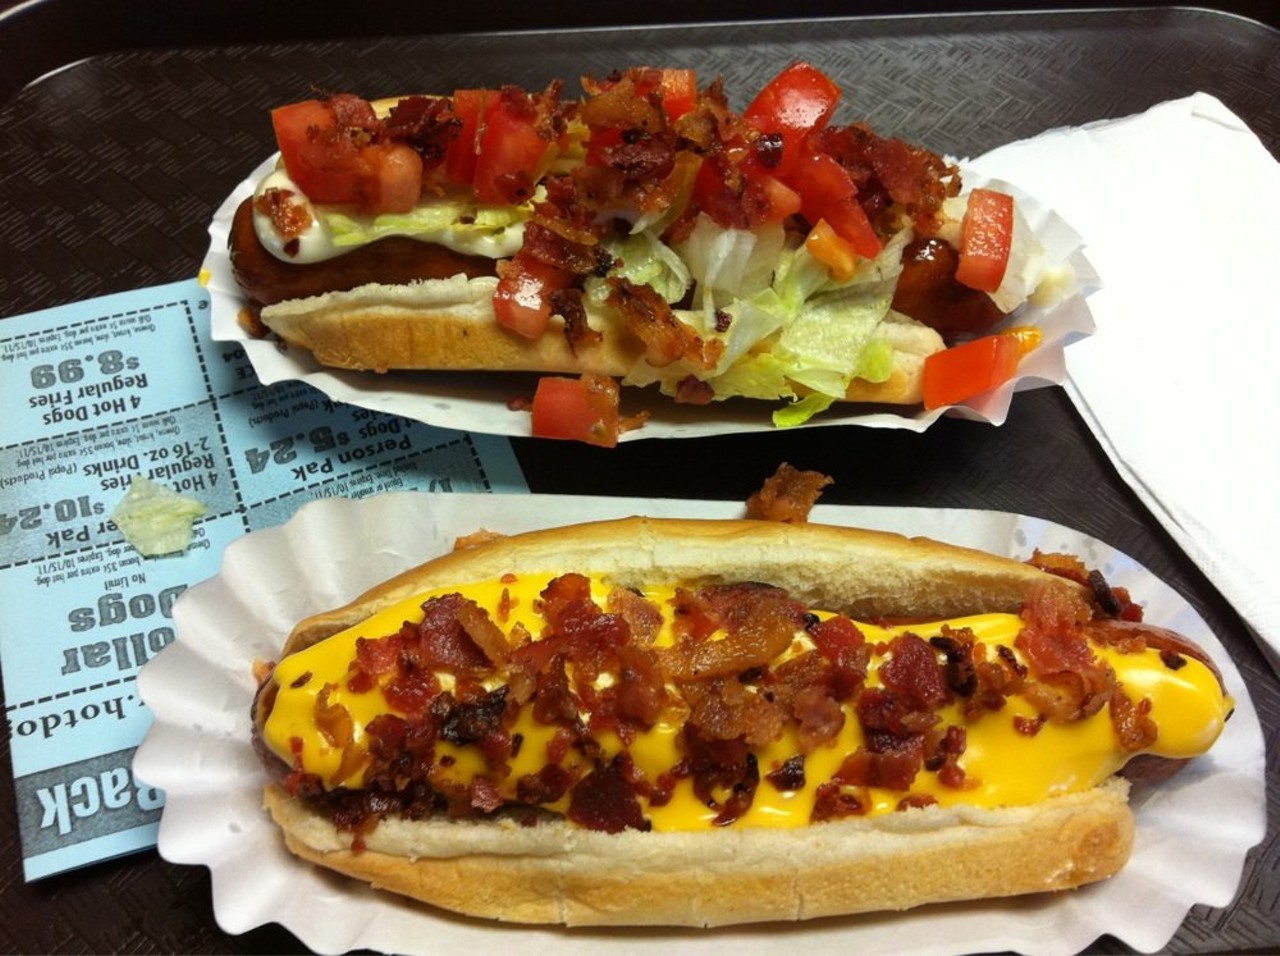 Hot Dog in Heaven - 493 Cleveland Ave, Amherst - 
This Amherst classic offers a killer B.L.T. dog with lettuce, tomato, bacon, and mayo. (Photo via Mitch C., Yelp)